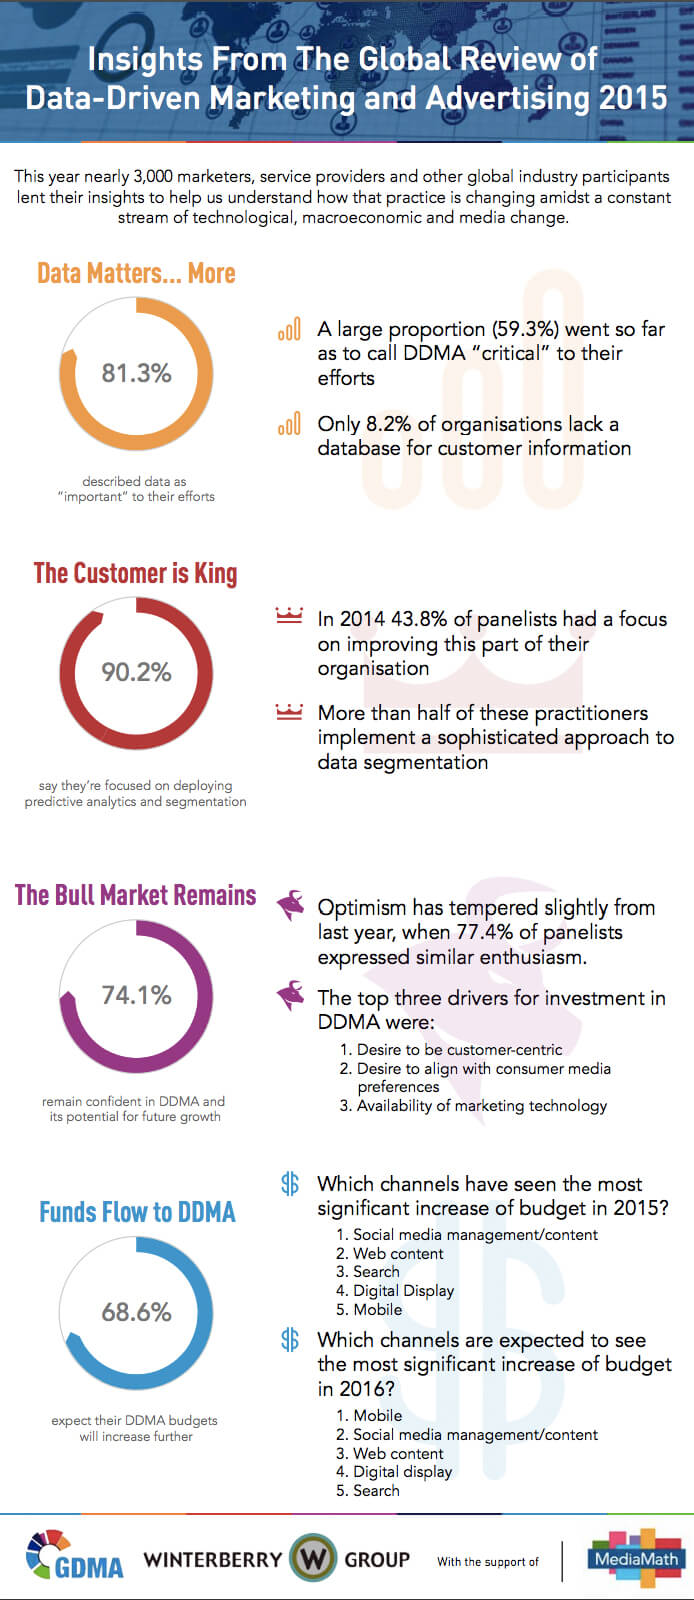 data driven marketing - the results are in from a global DMA study